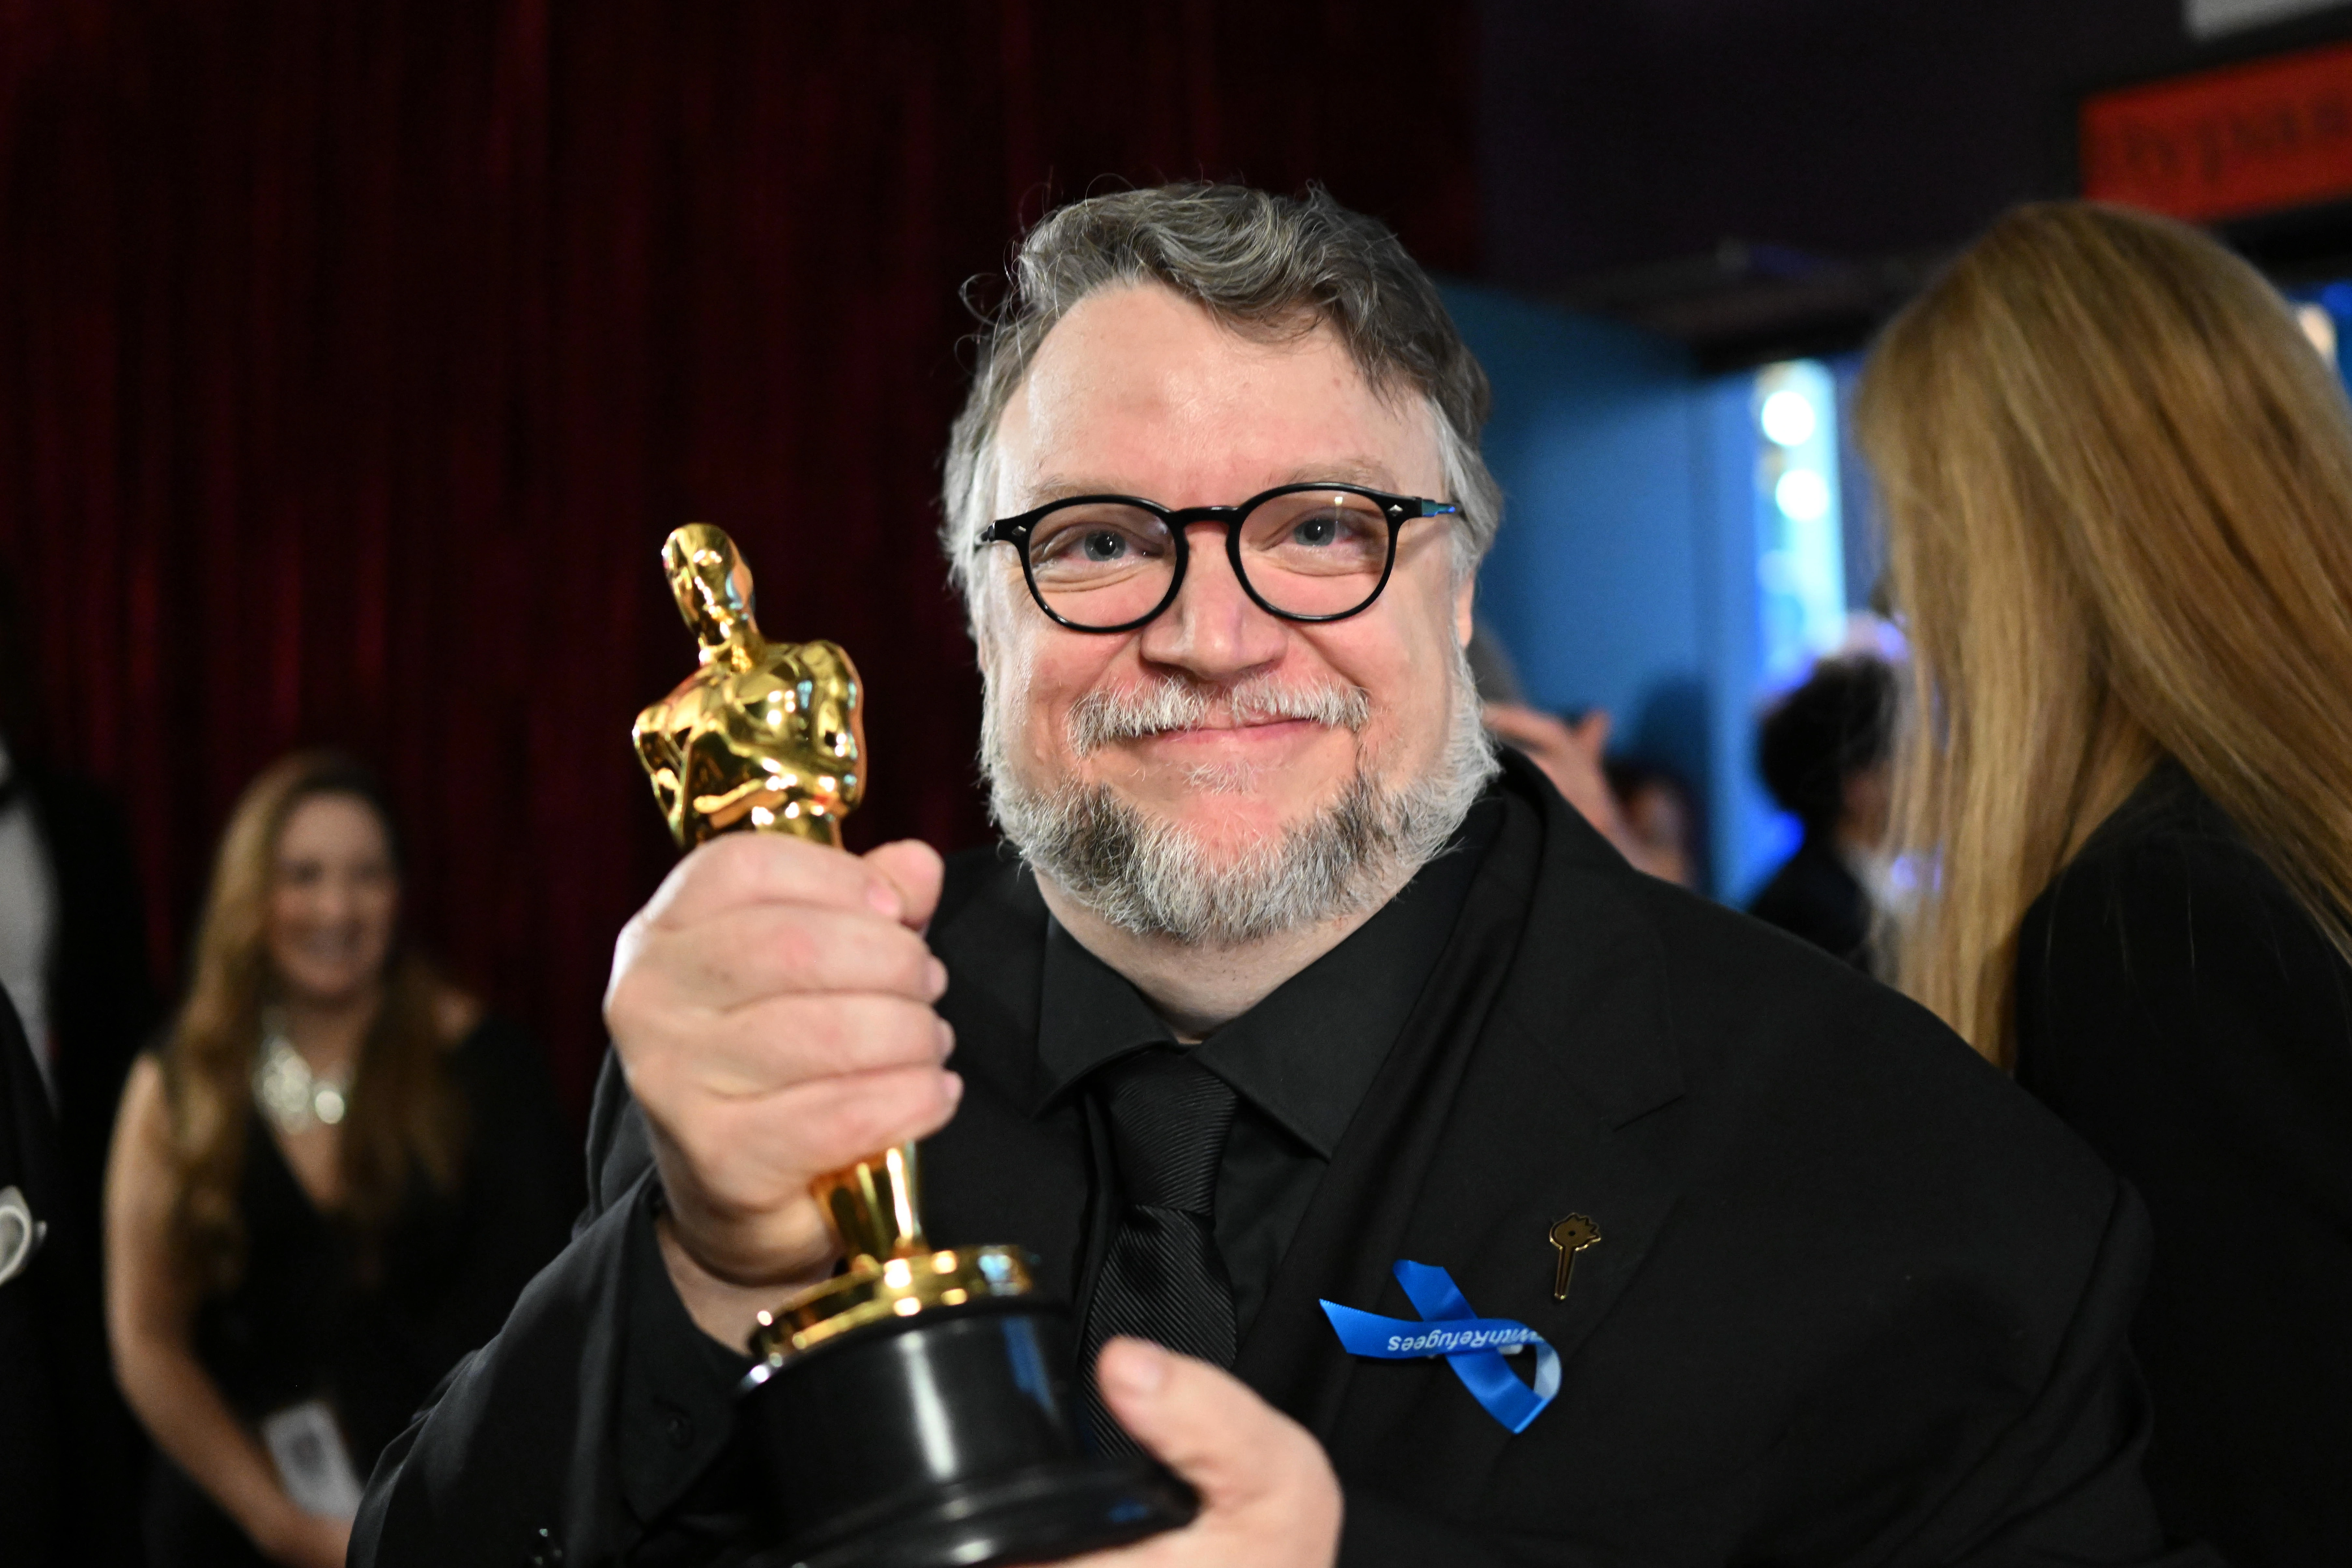 Guillermo del Toro Wants to Focus On Animation Over Live-Action Movies